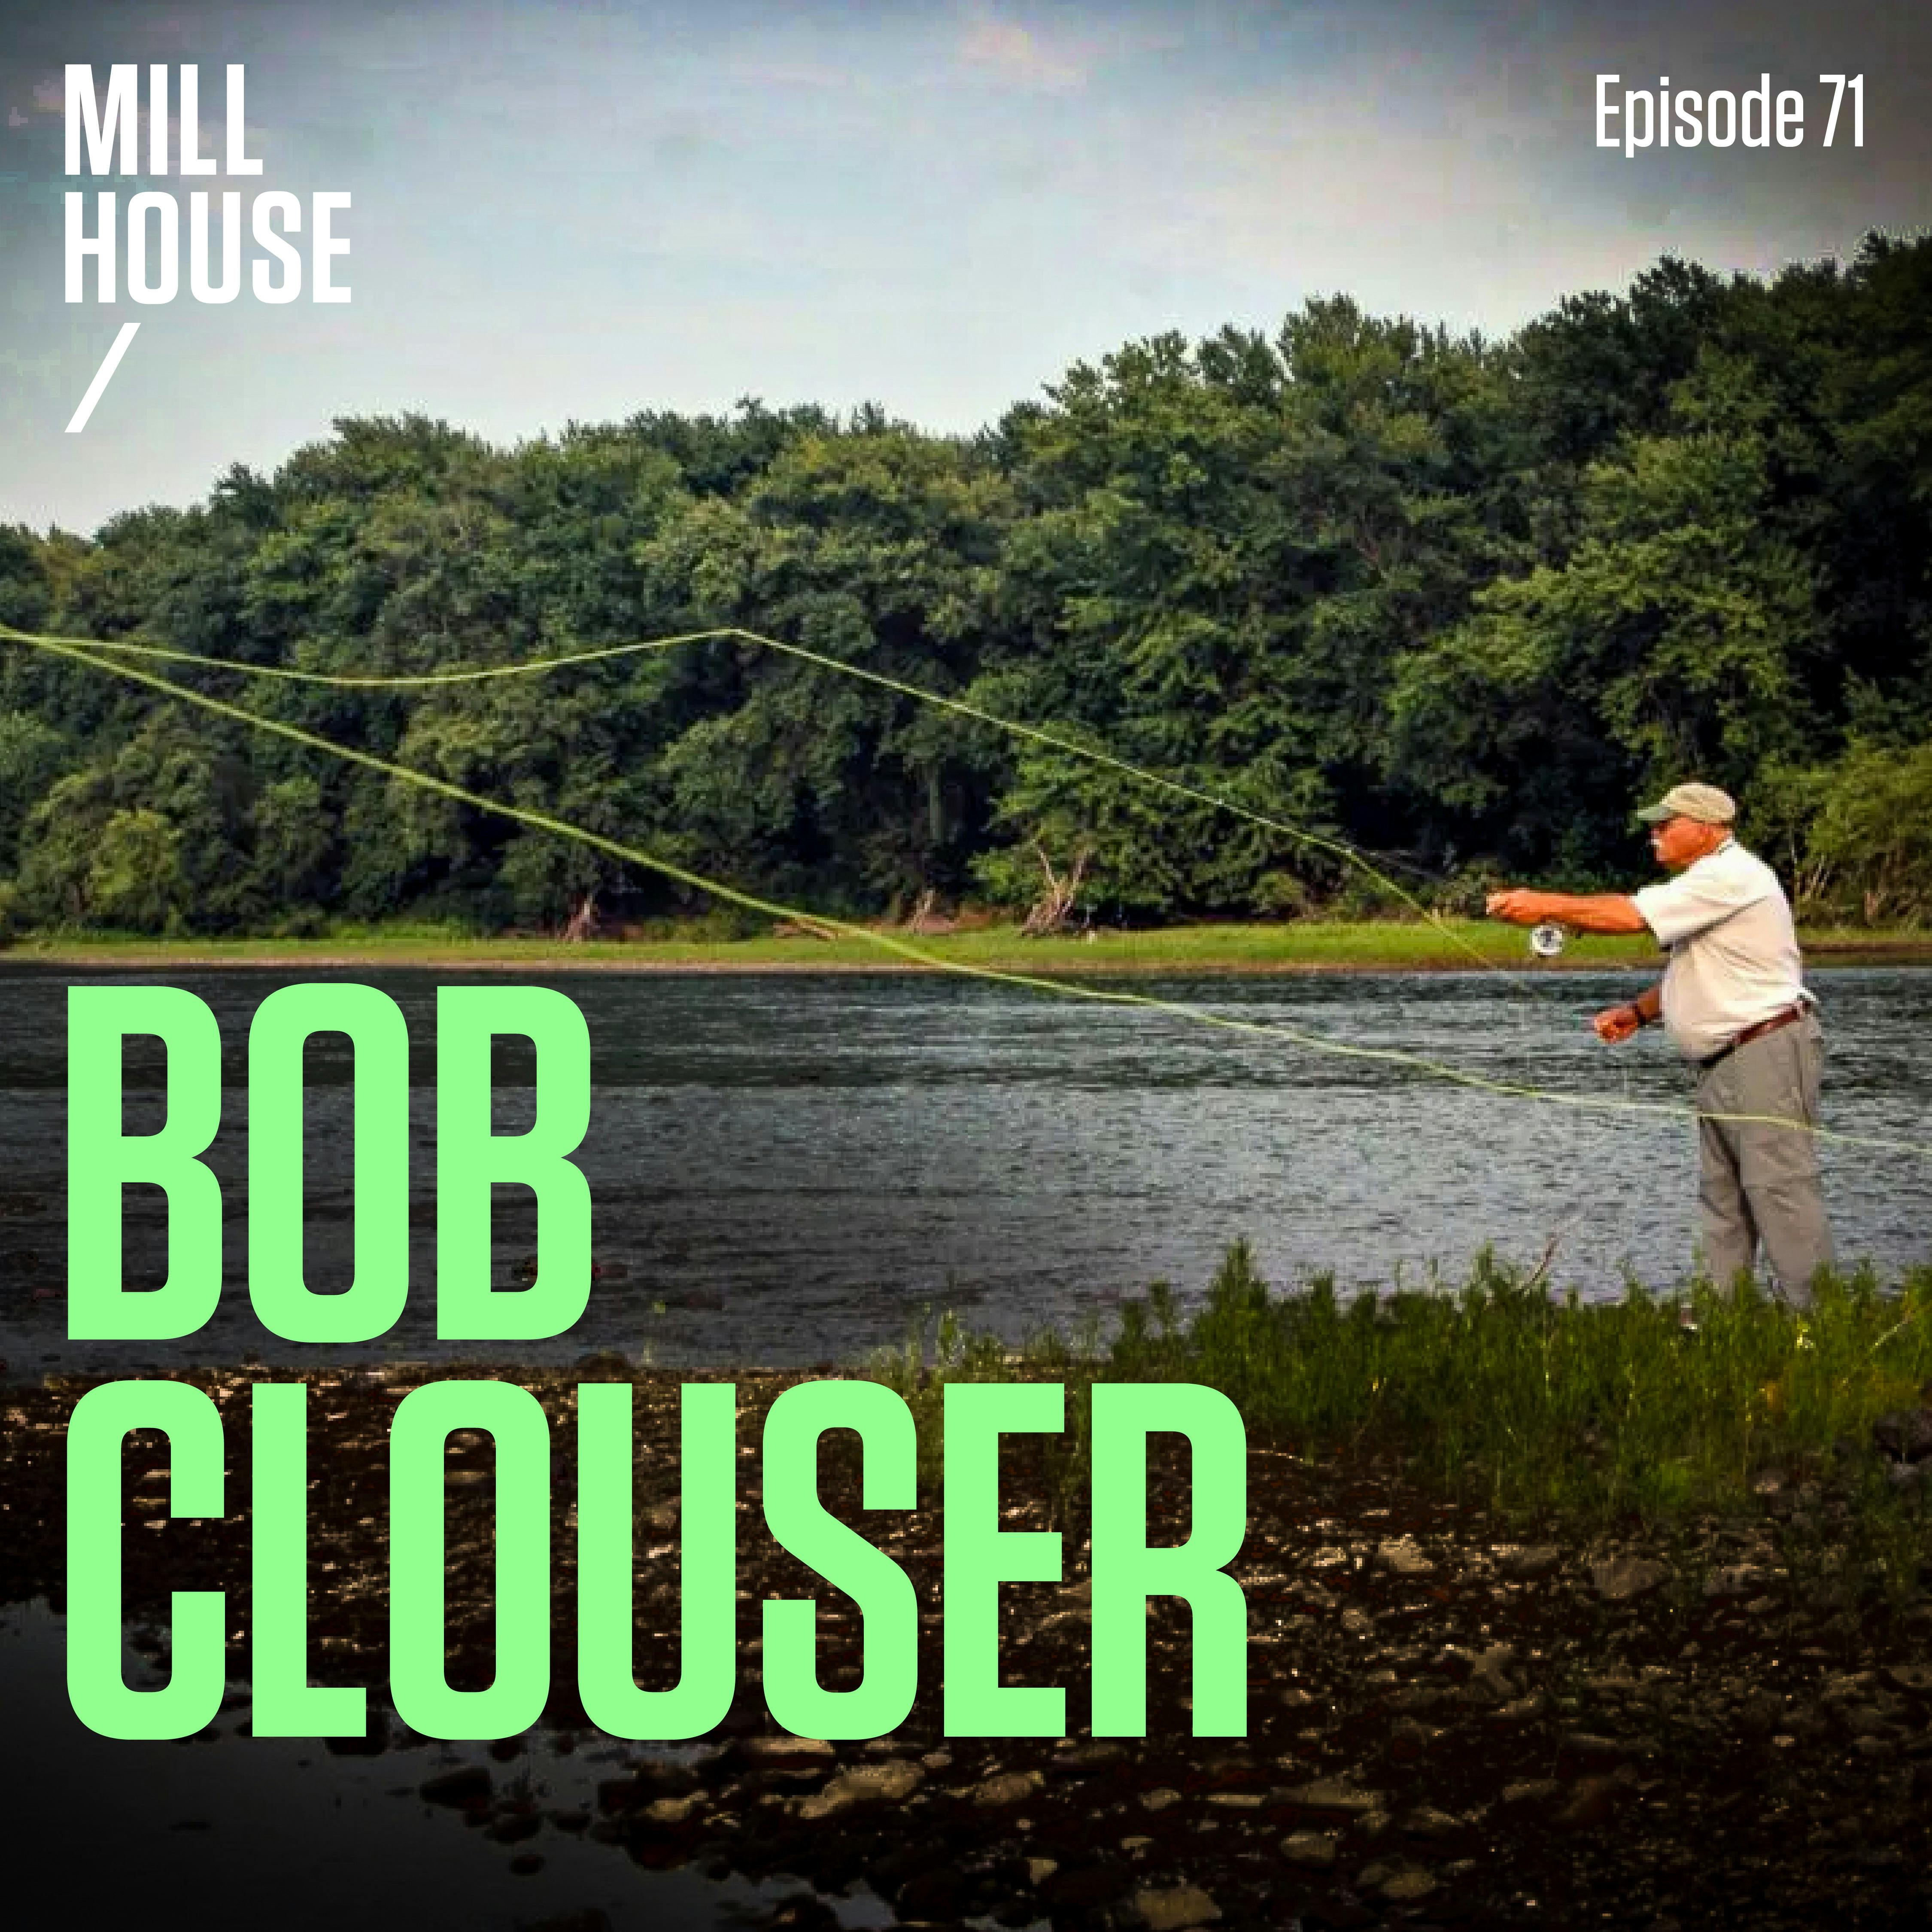 Episode 71: Bob Clouser - Fly Tying, Smallmouth Bass, & Stories with Lefty